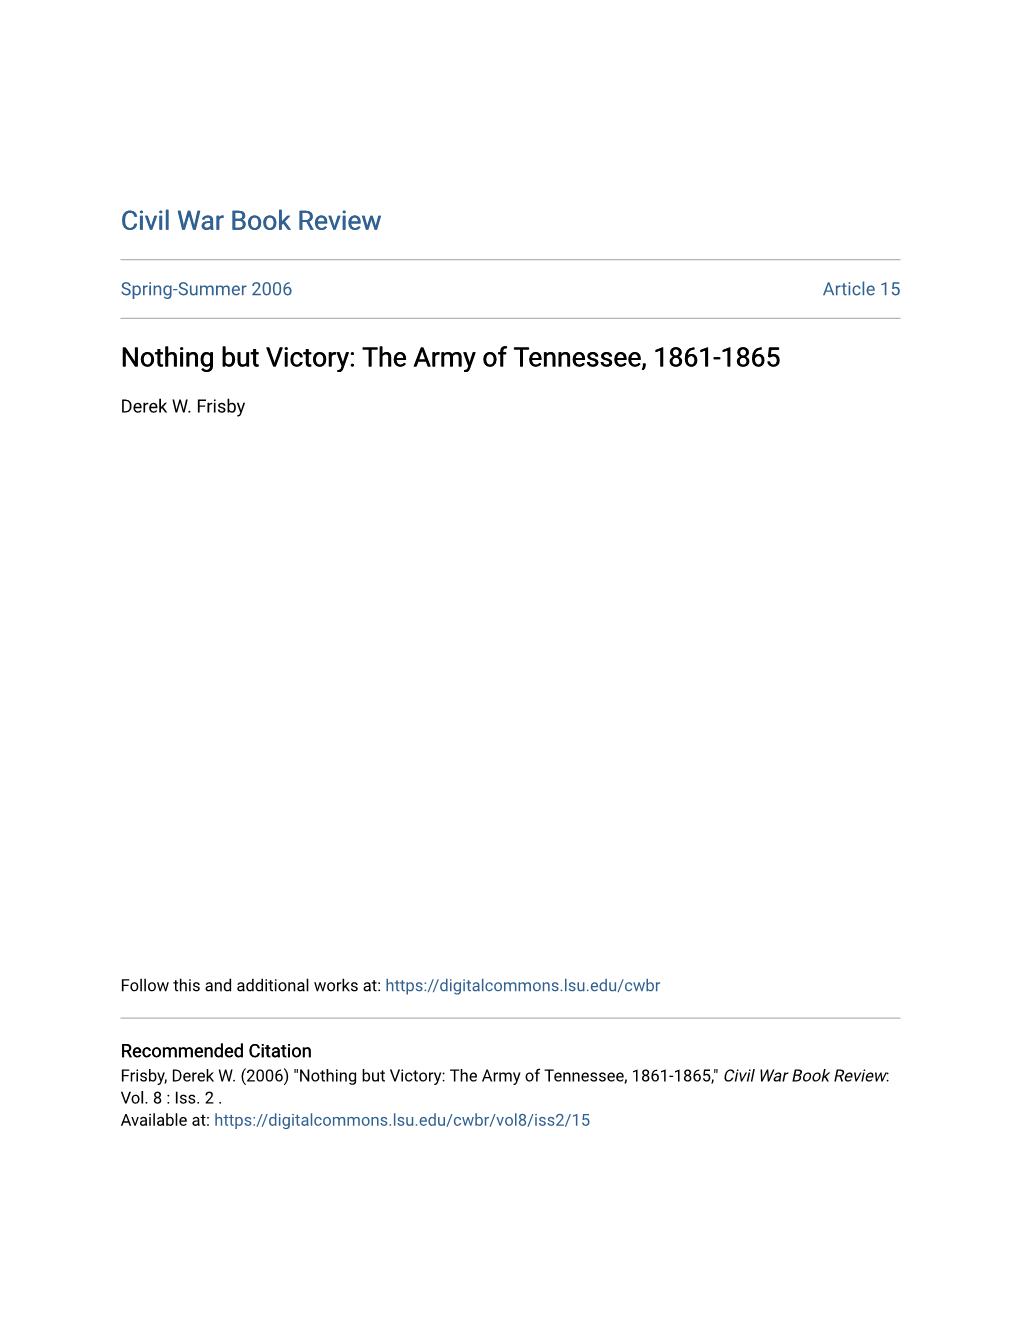 Nothing but Victory: the Army of Tennessee, 1861-1865